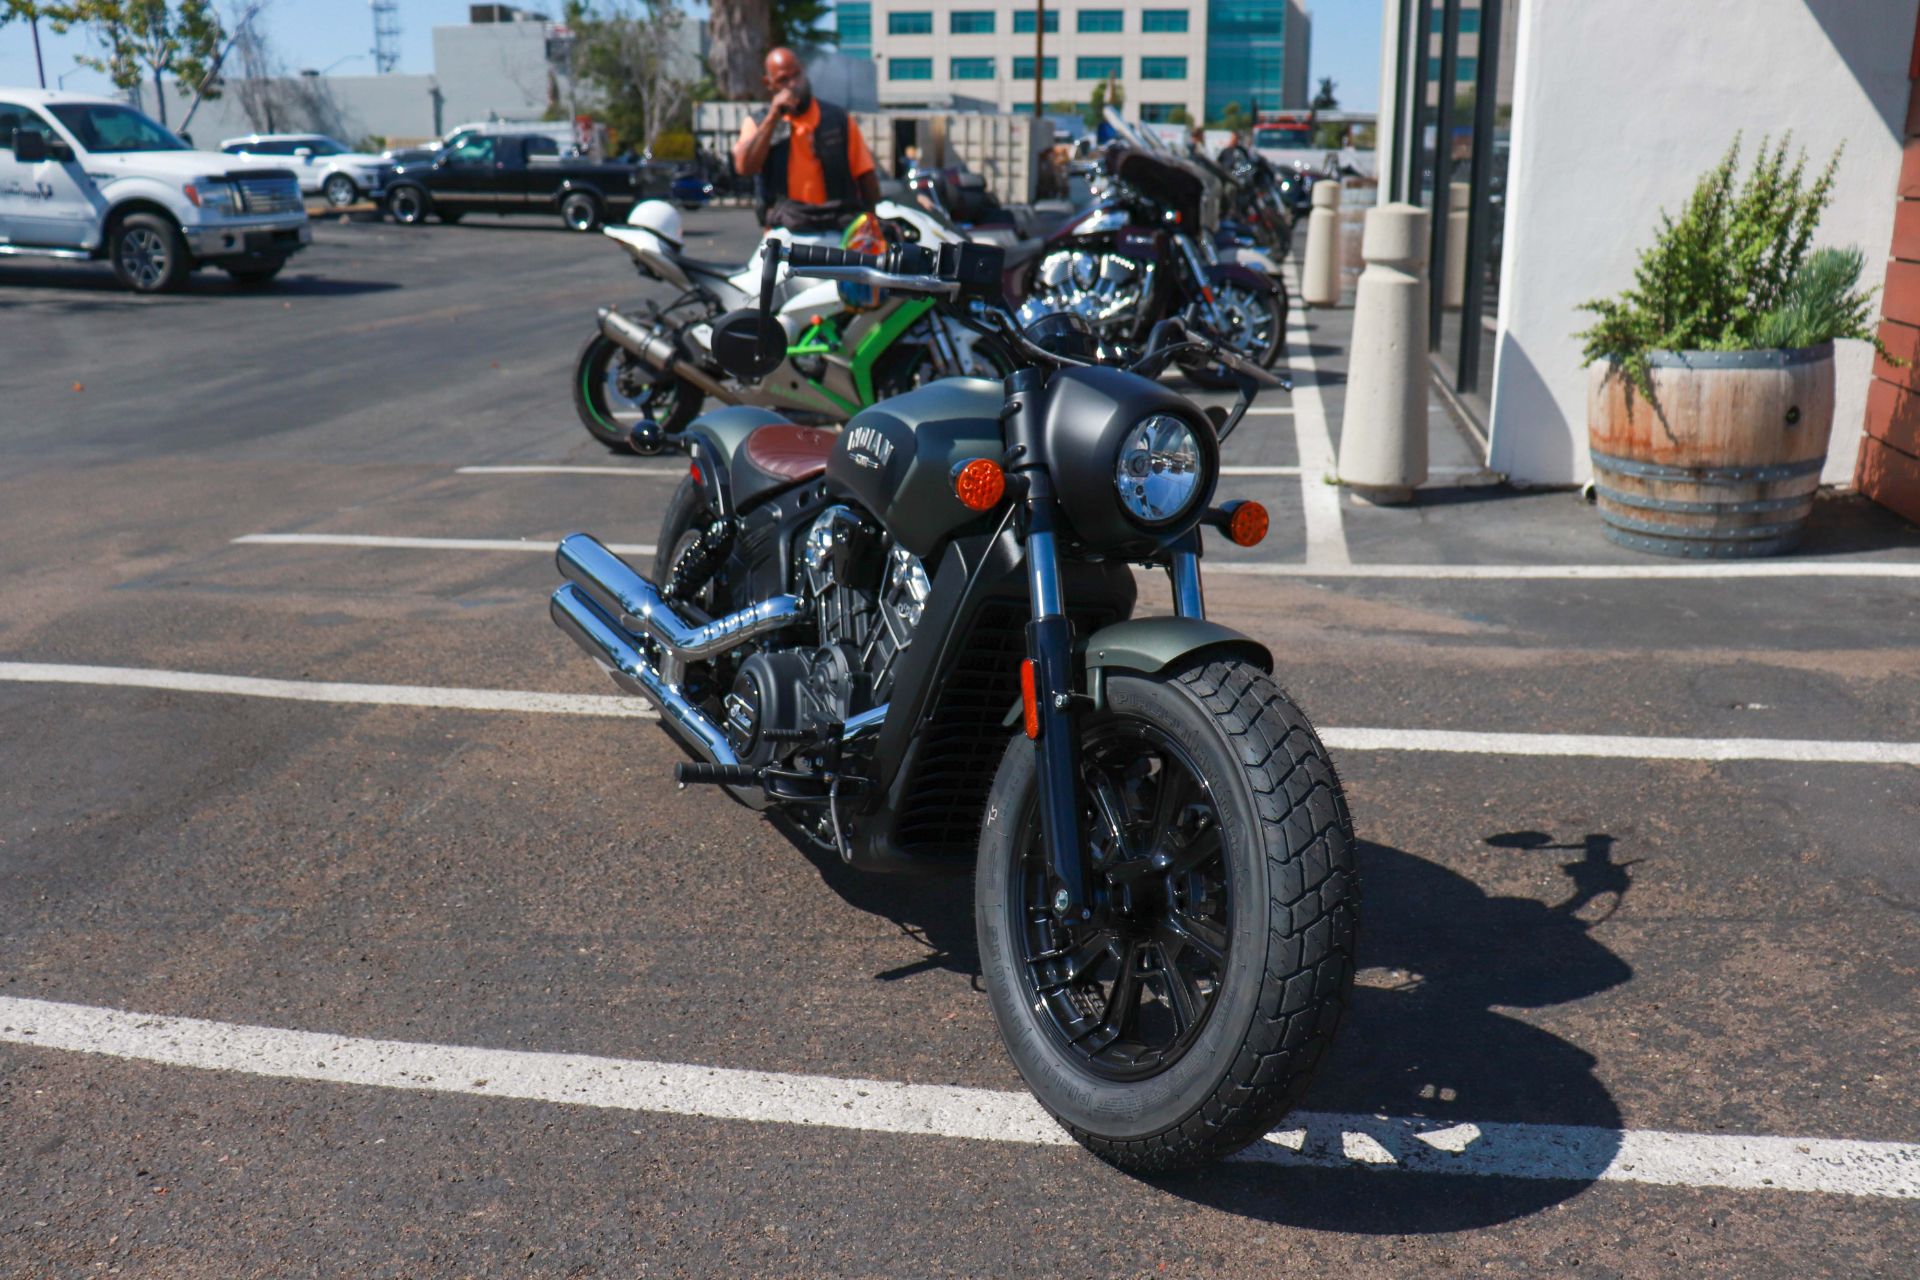 2022 Indian Scout® Bobber ABS in San Diego, California - Photo 4